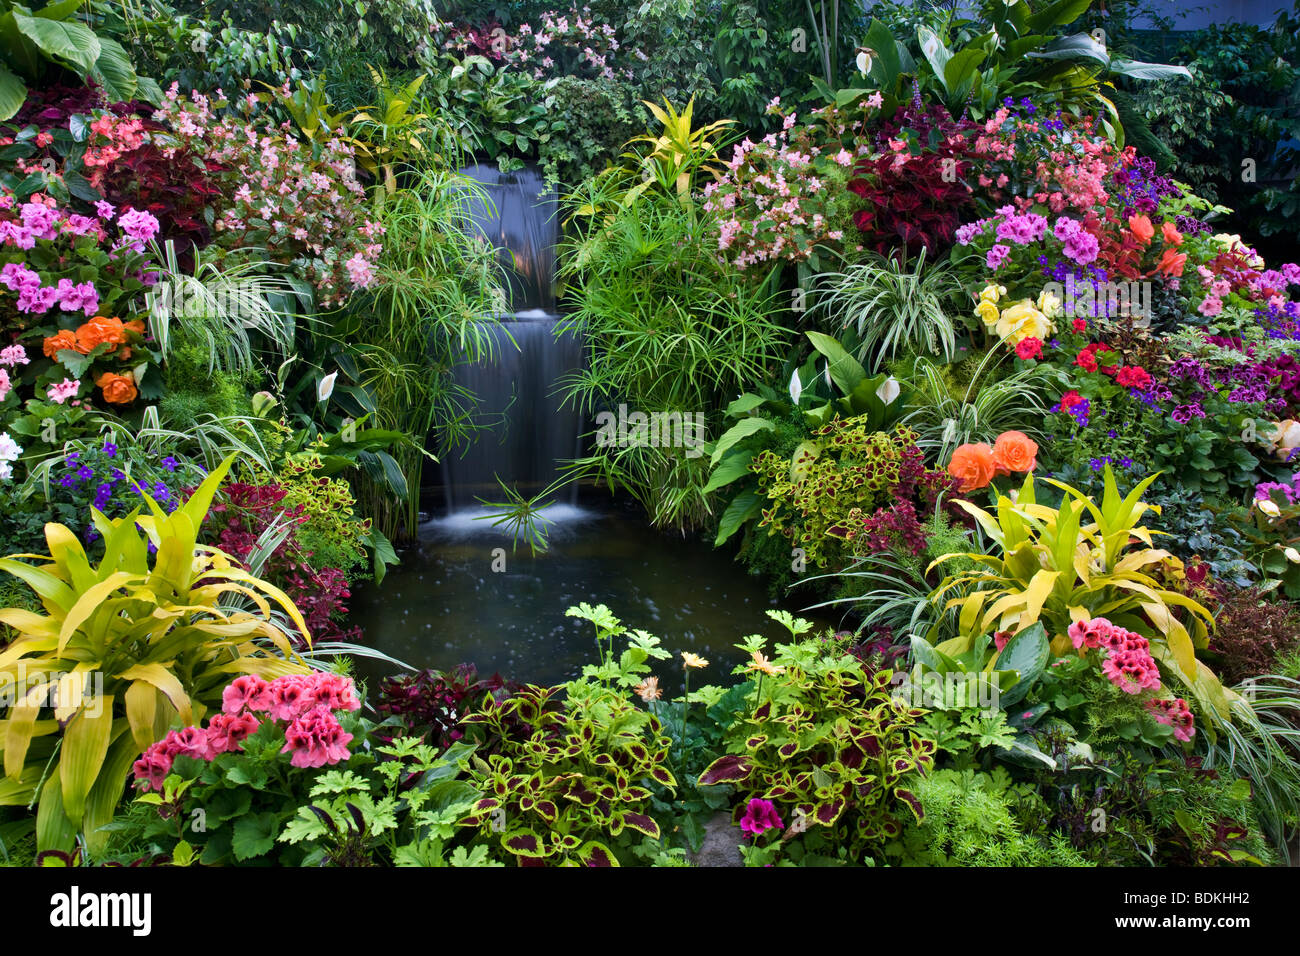 the-show-greenhouse-at-the-butchart-gardens-victoria-vancouver-island-BDKHH2.jpg